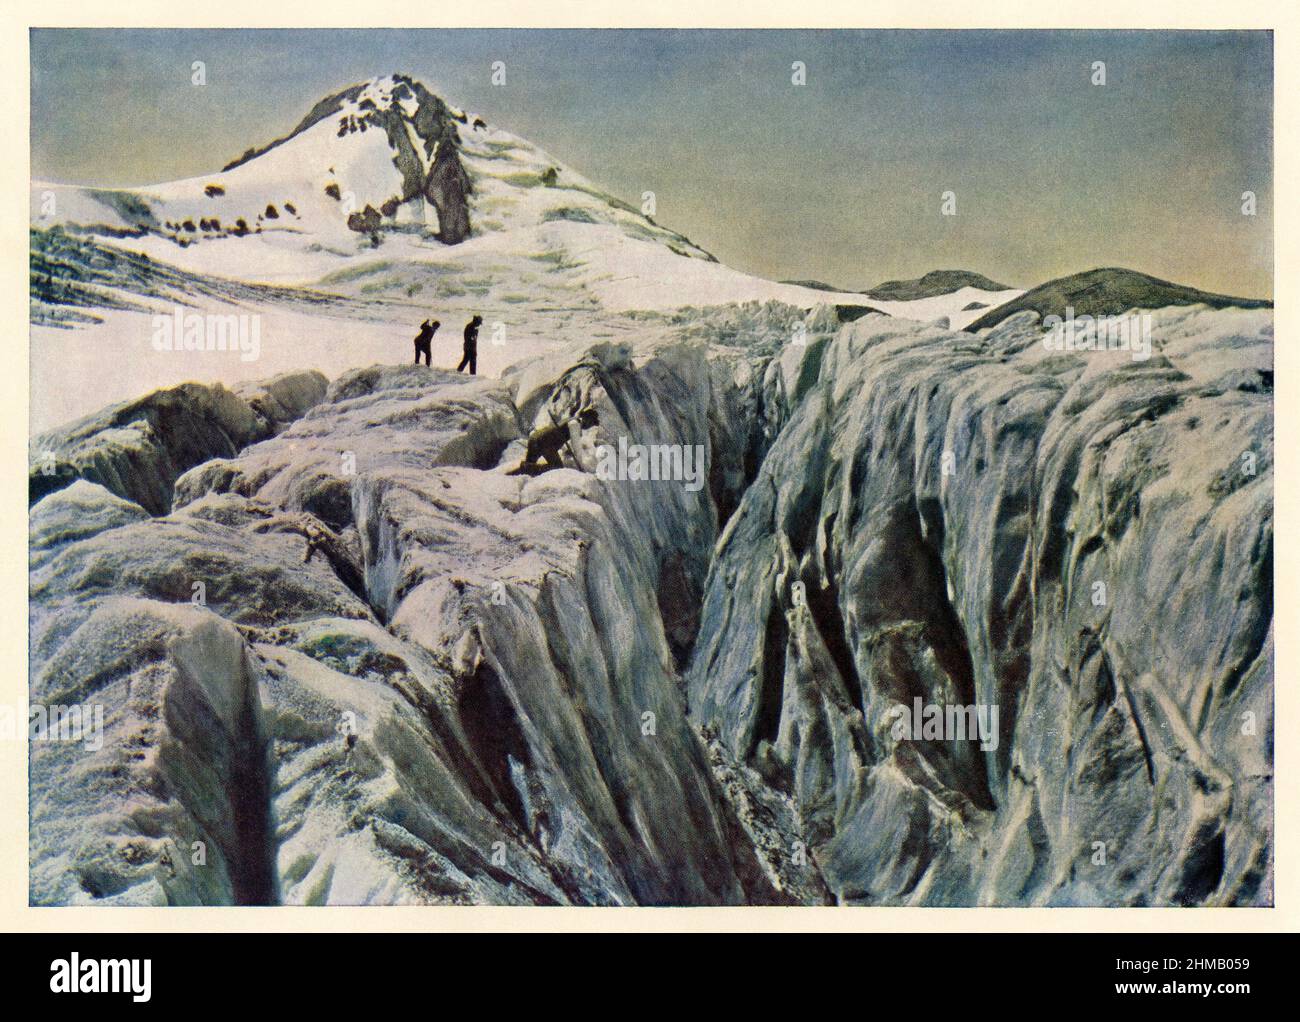 Climbers on Eliot Glacier, Mount Hood, Oregon, early 1900s. Color halftone of a photograph Stock Photo